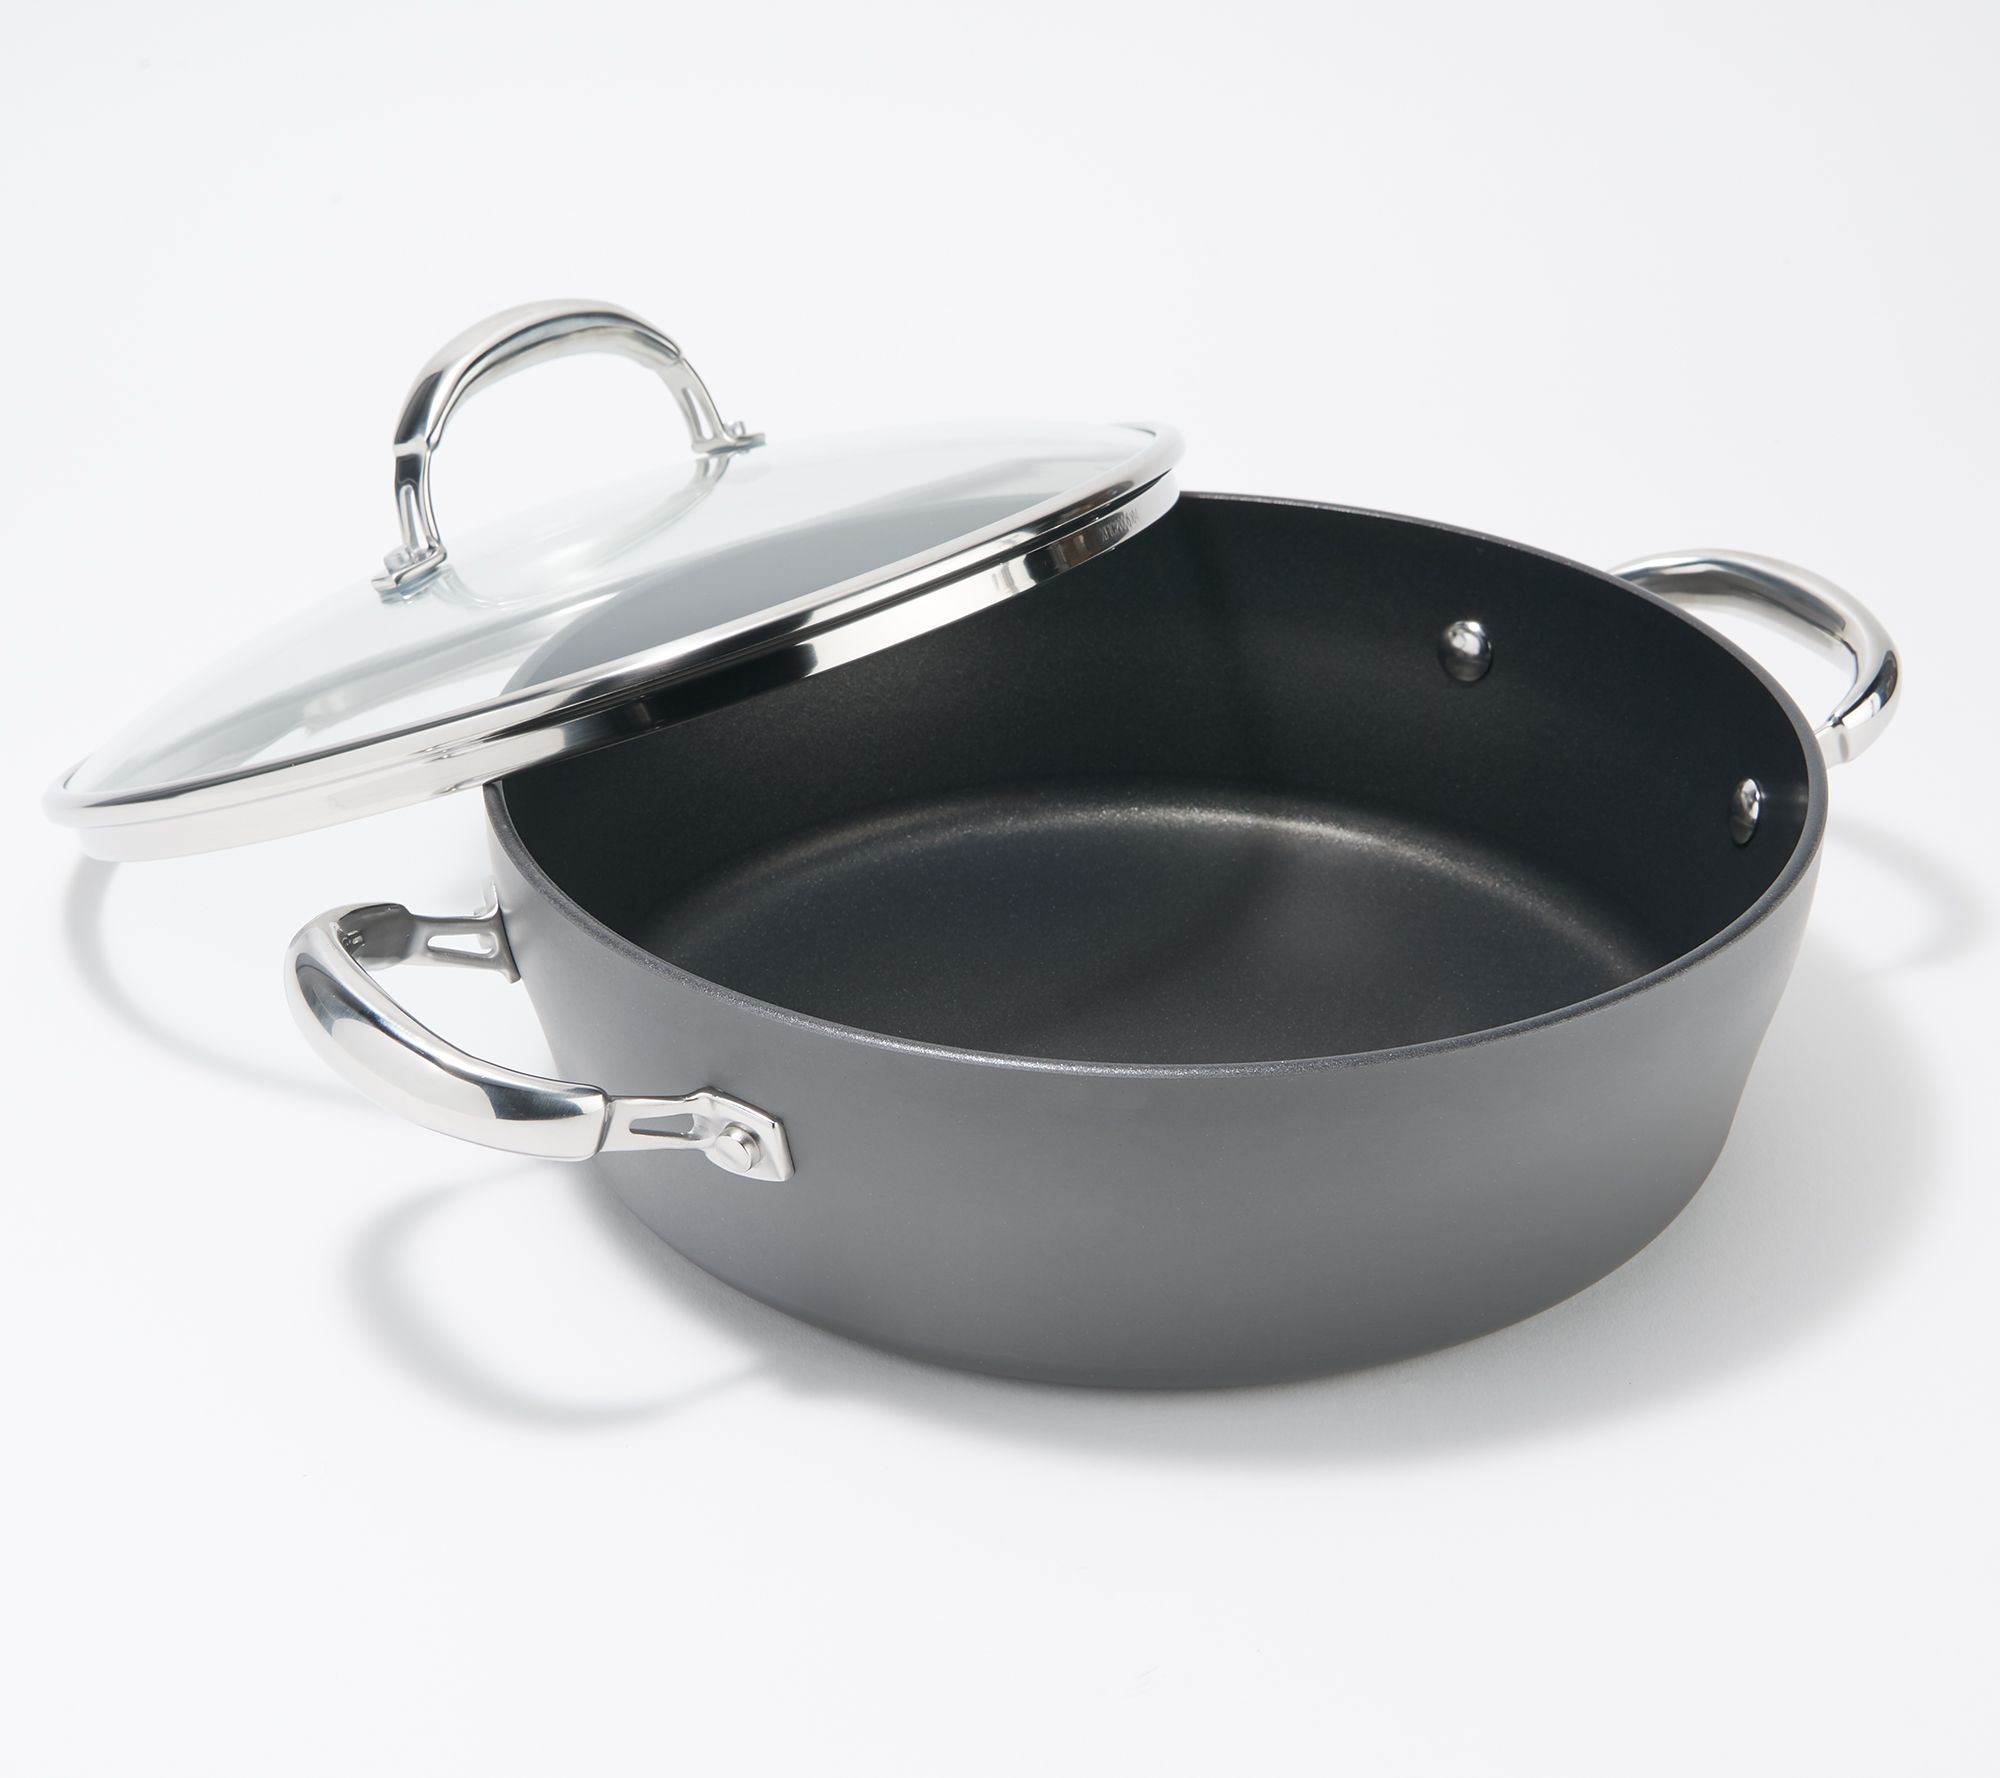 Cook's Essentials Hard Anodized 5-qt Saute Pan with Glass Lid 